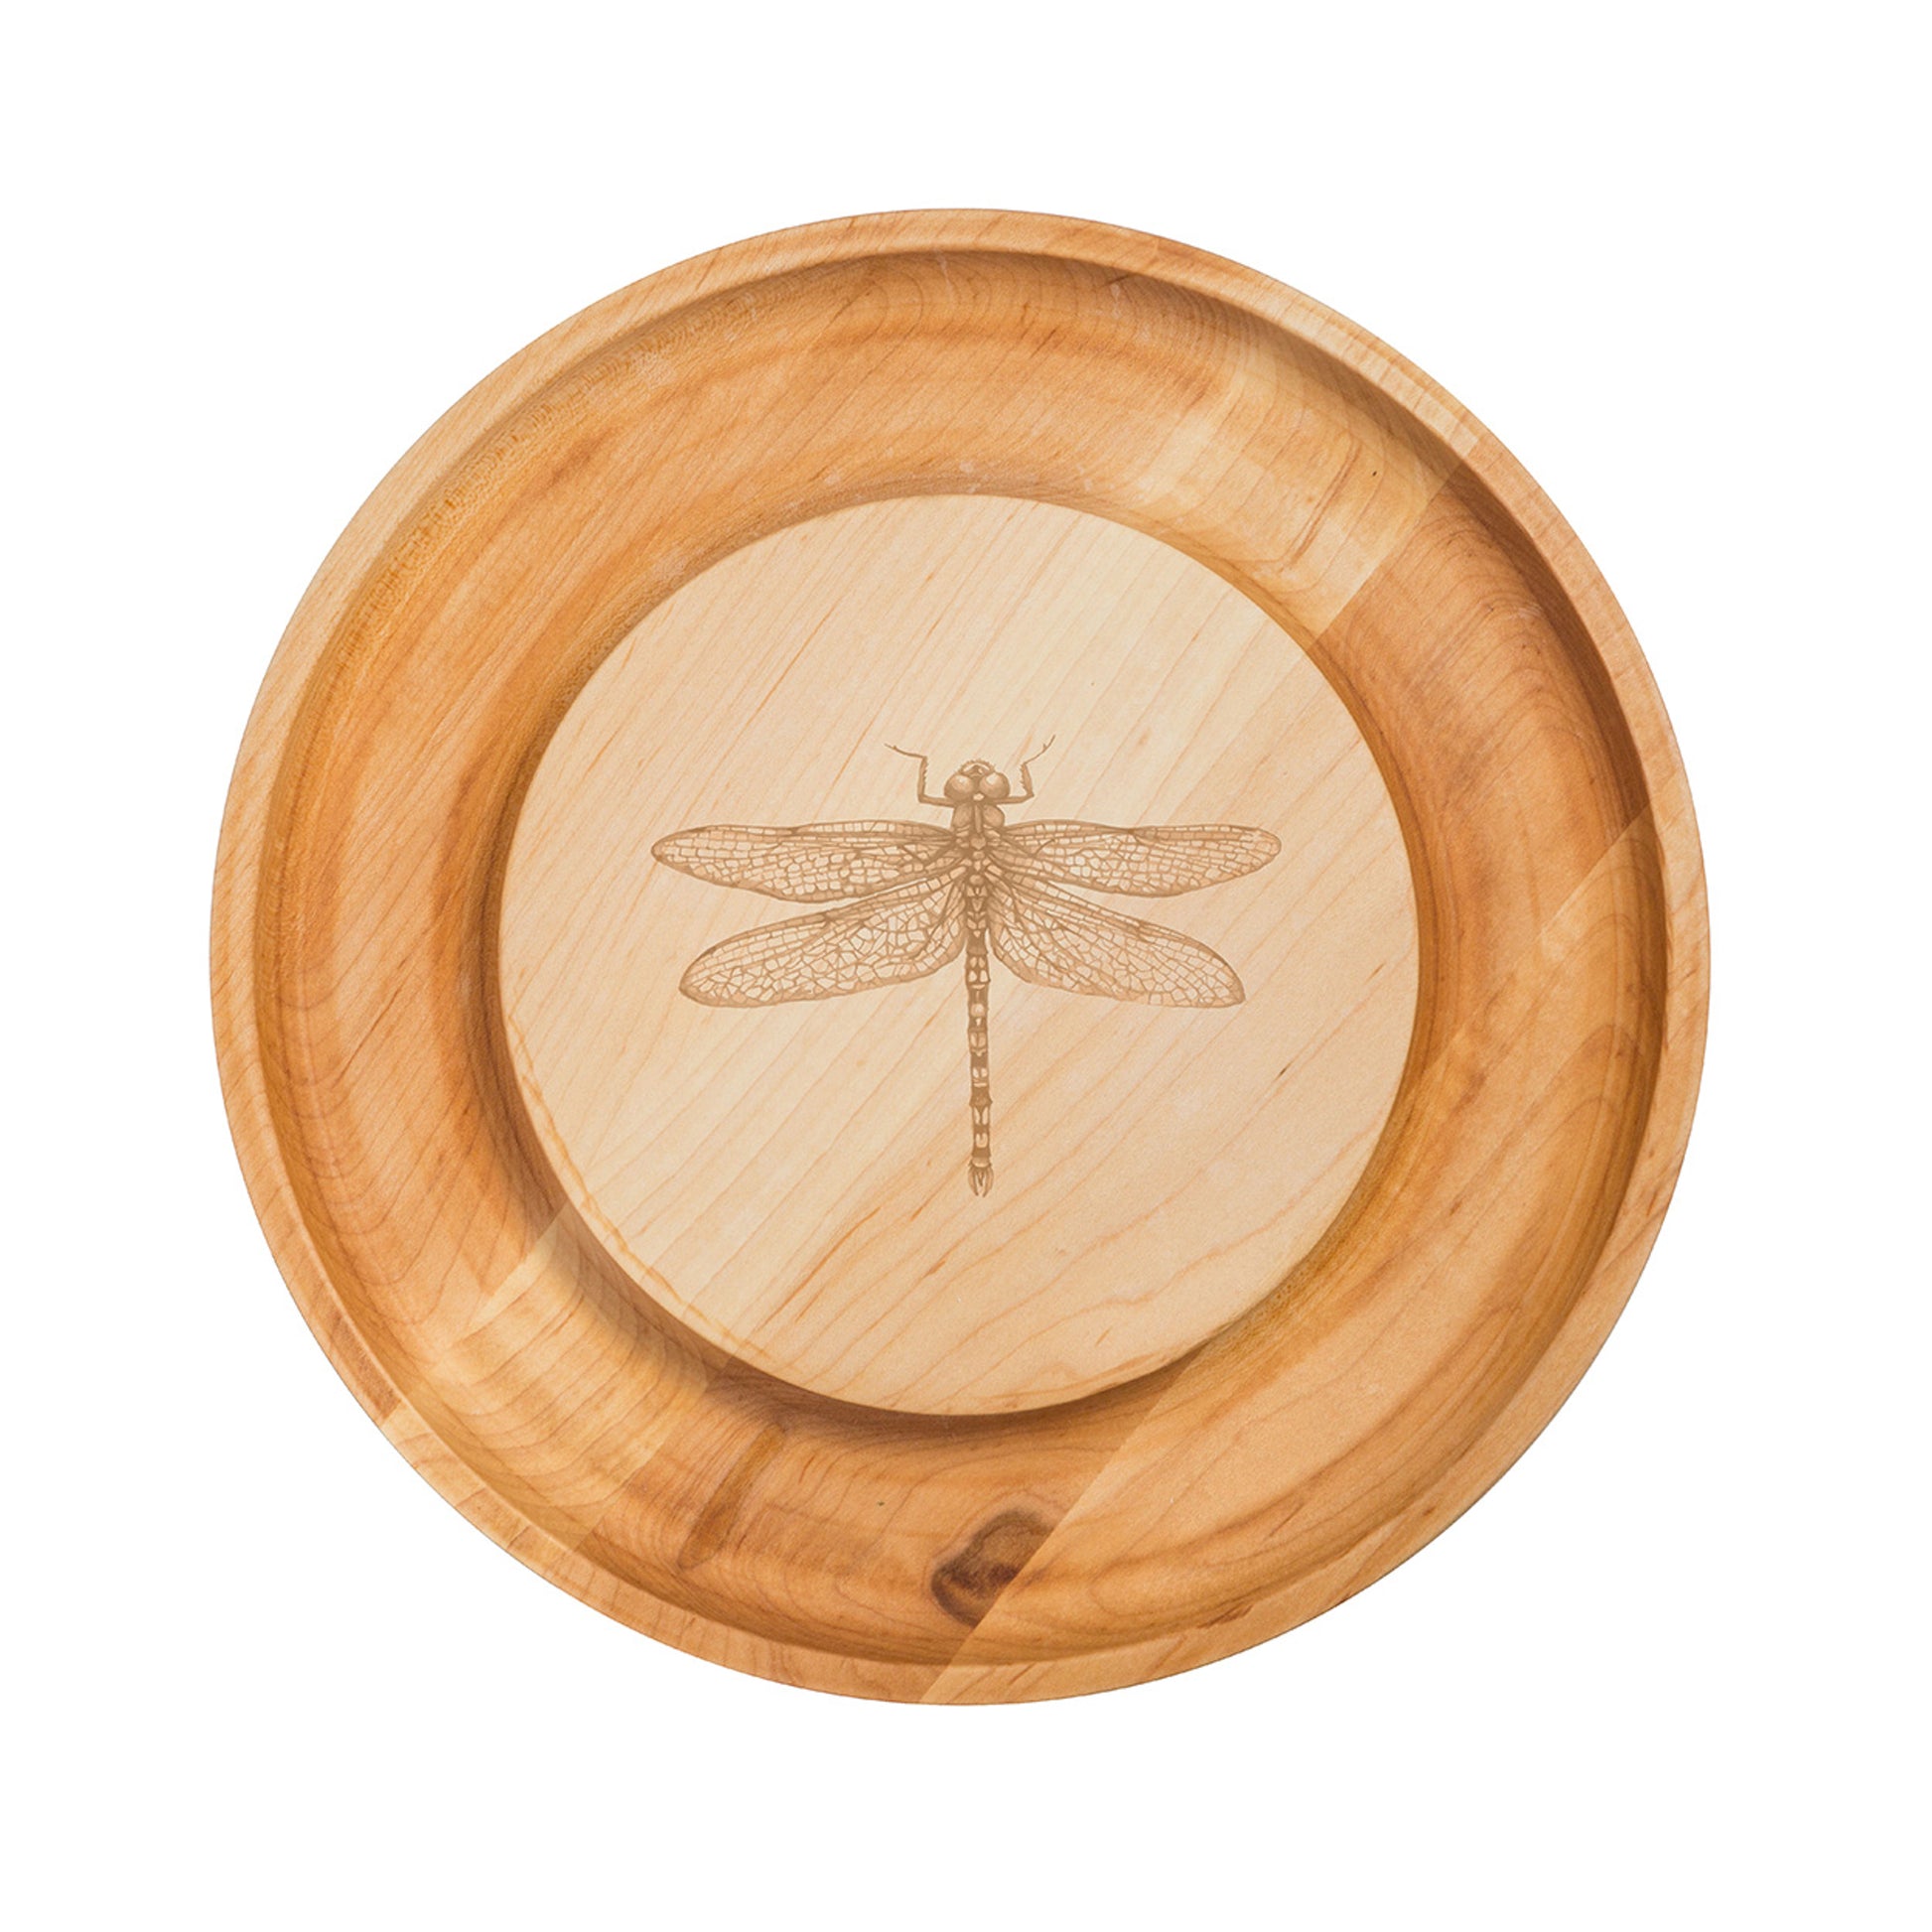 Laura Zindel Illustrations Maple Round Cheese Board - More designs available